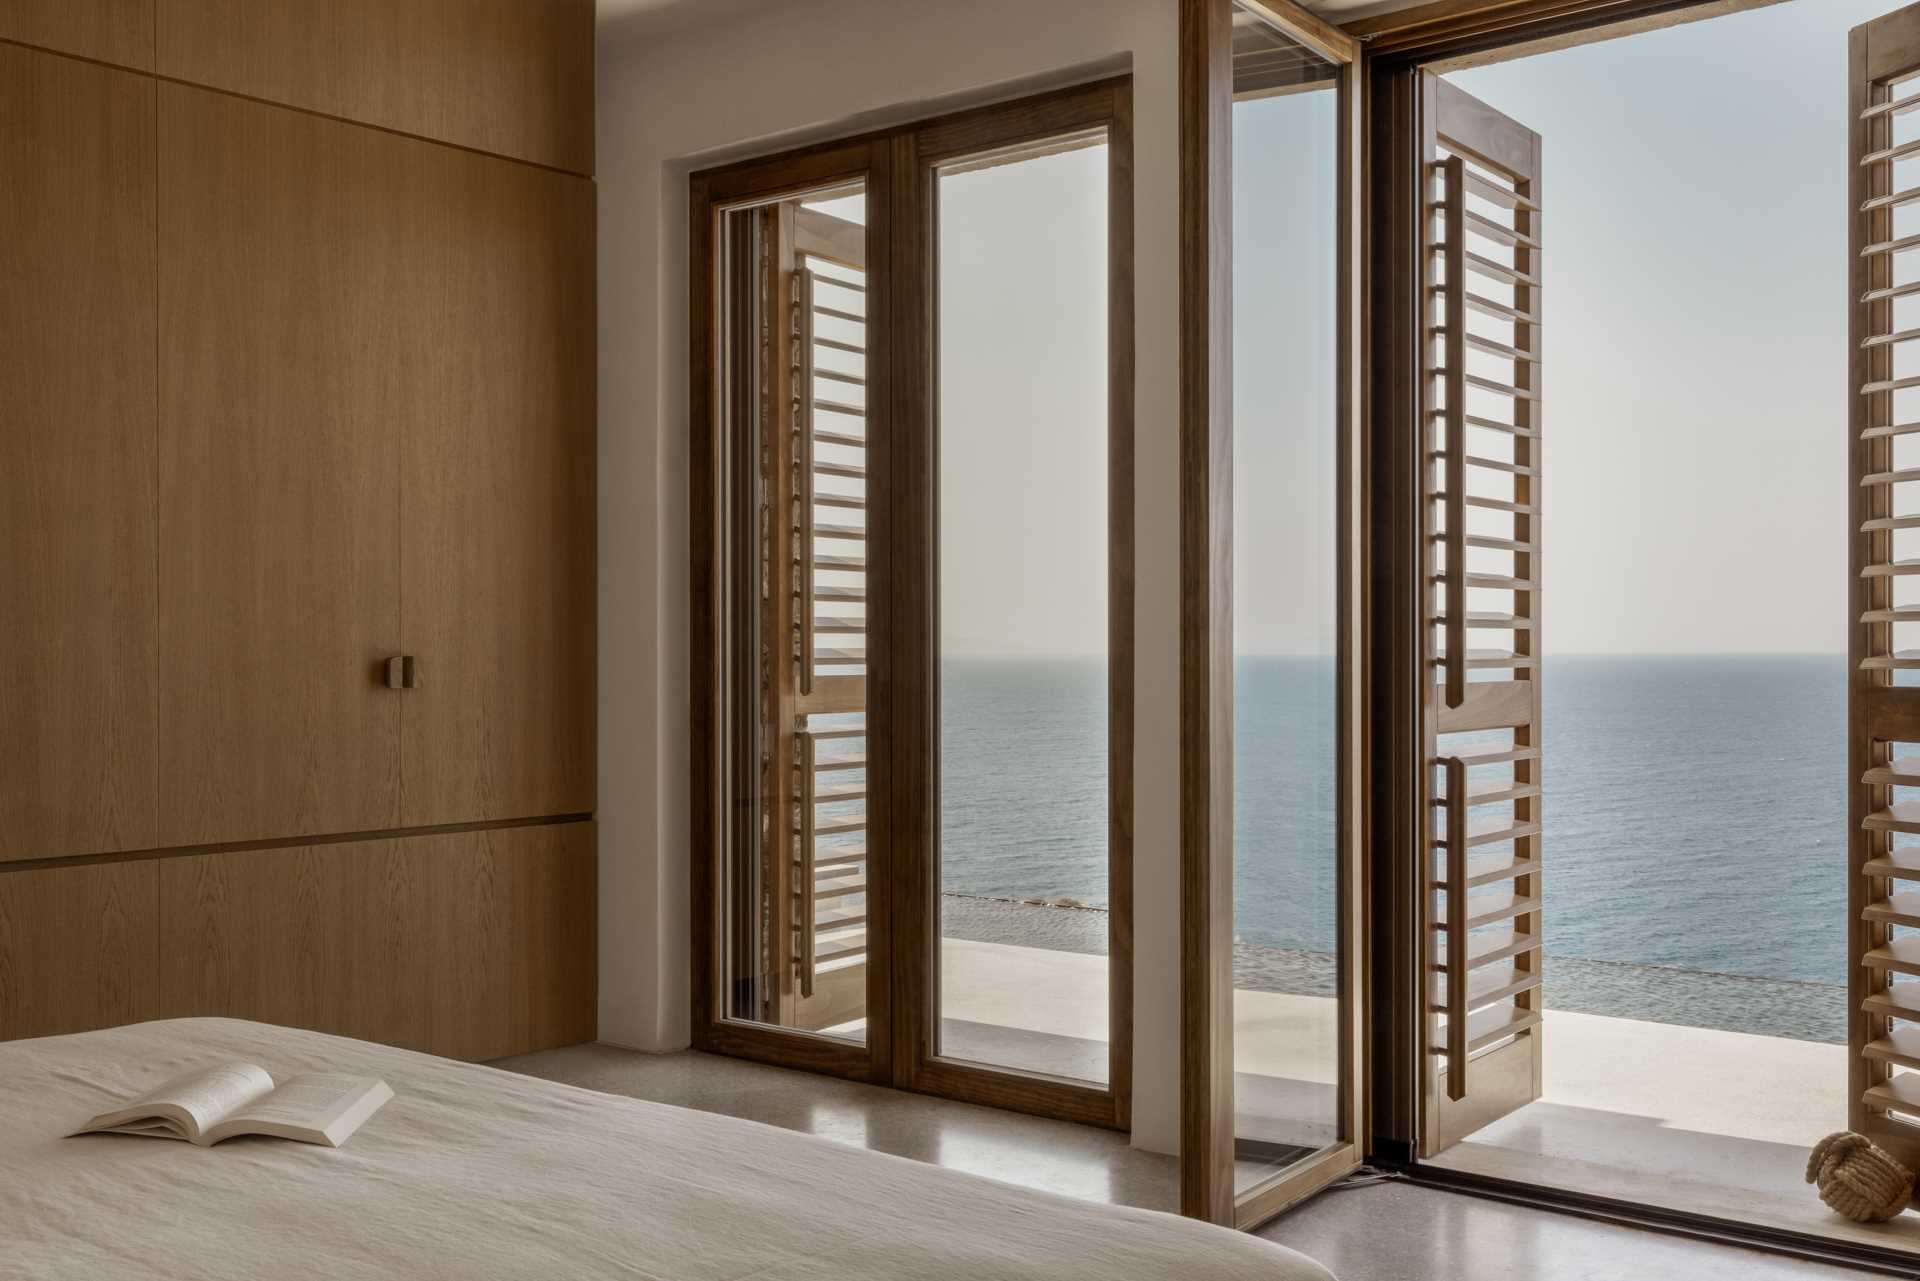 A modern bedroom with windows that open to a sea view.